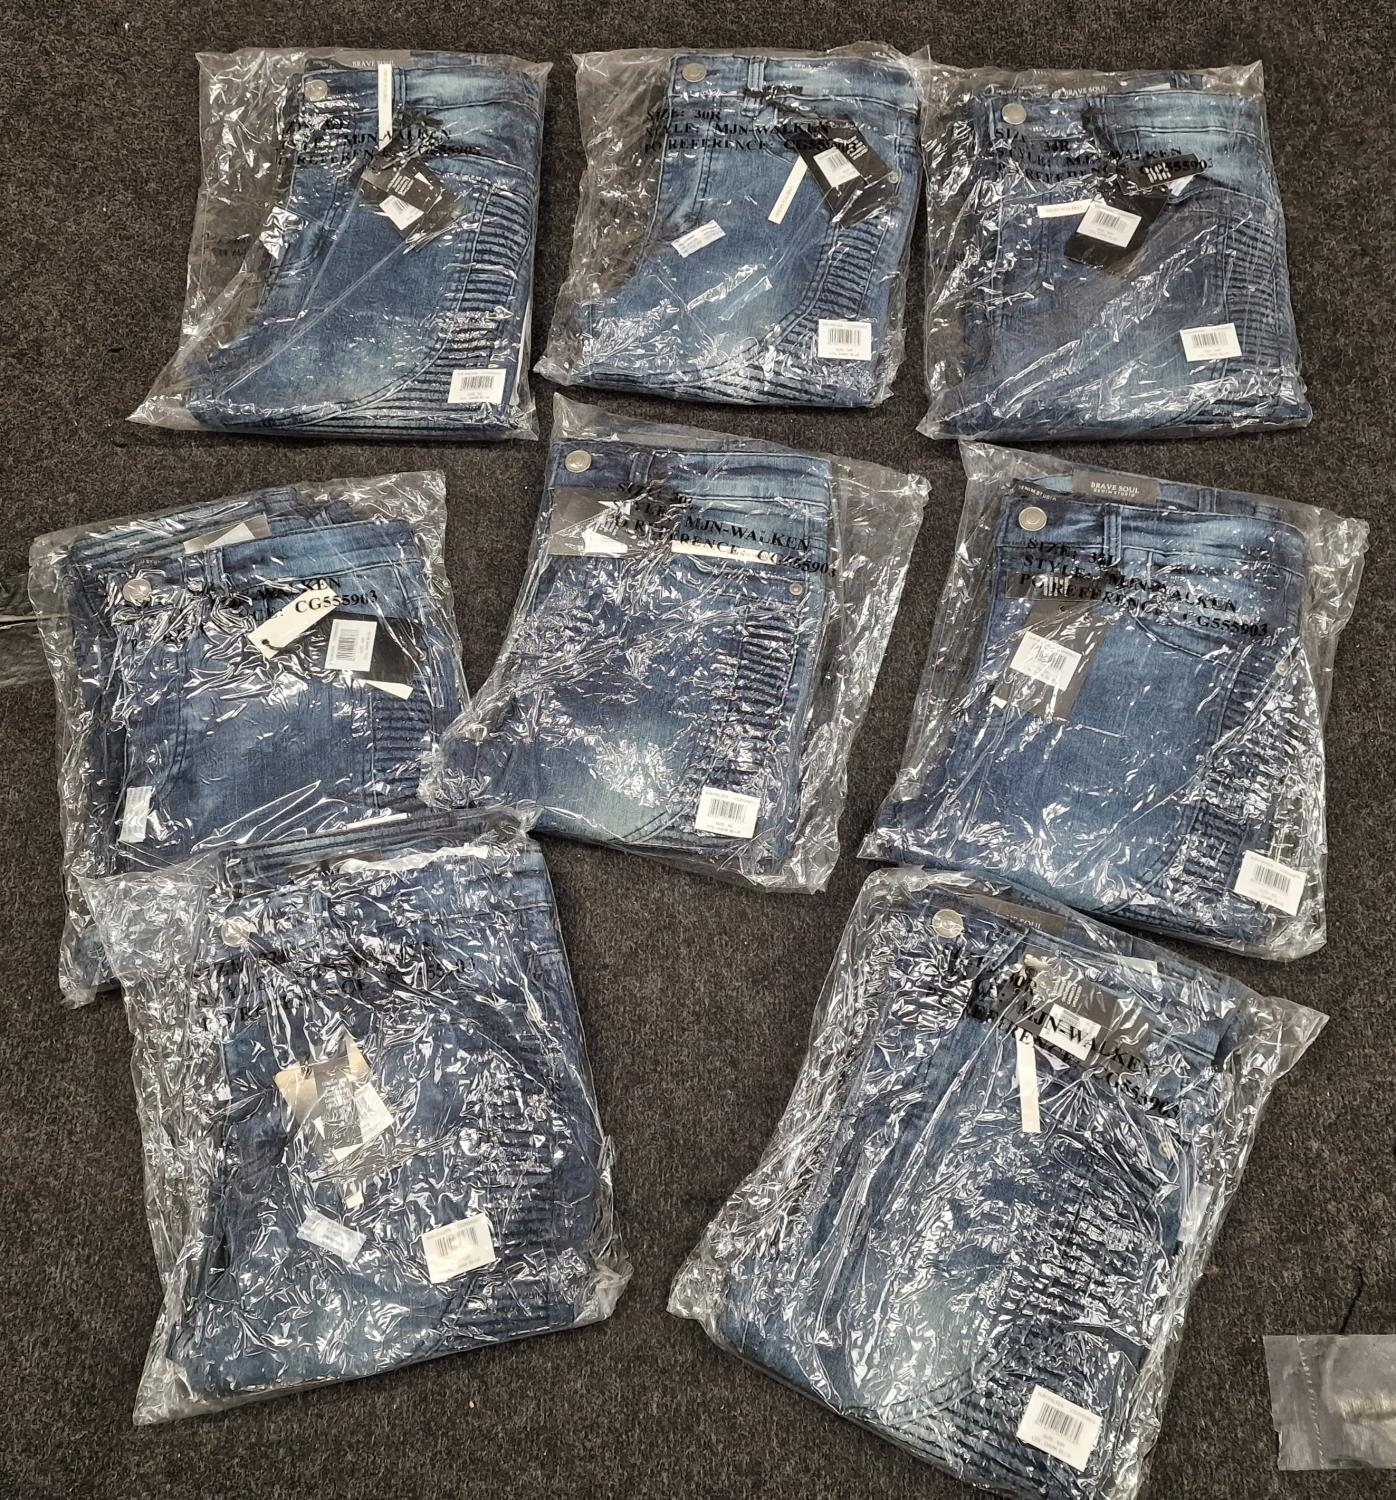 A quantity of Brave Soul dark blue skinny jeans, various sizes. All BNWT (ref:75)